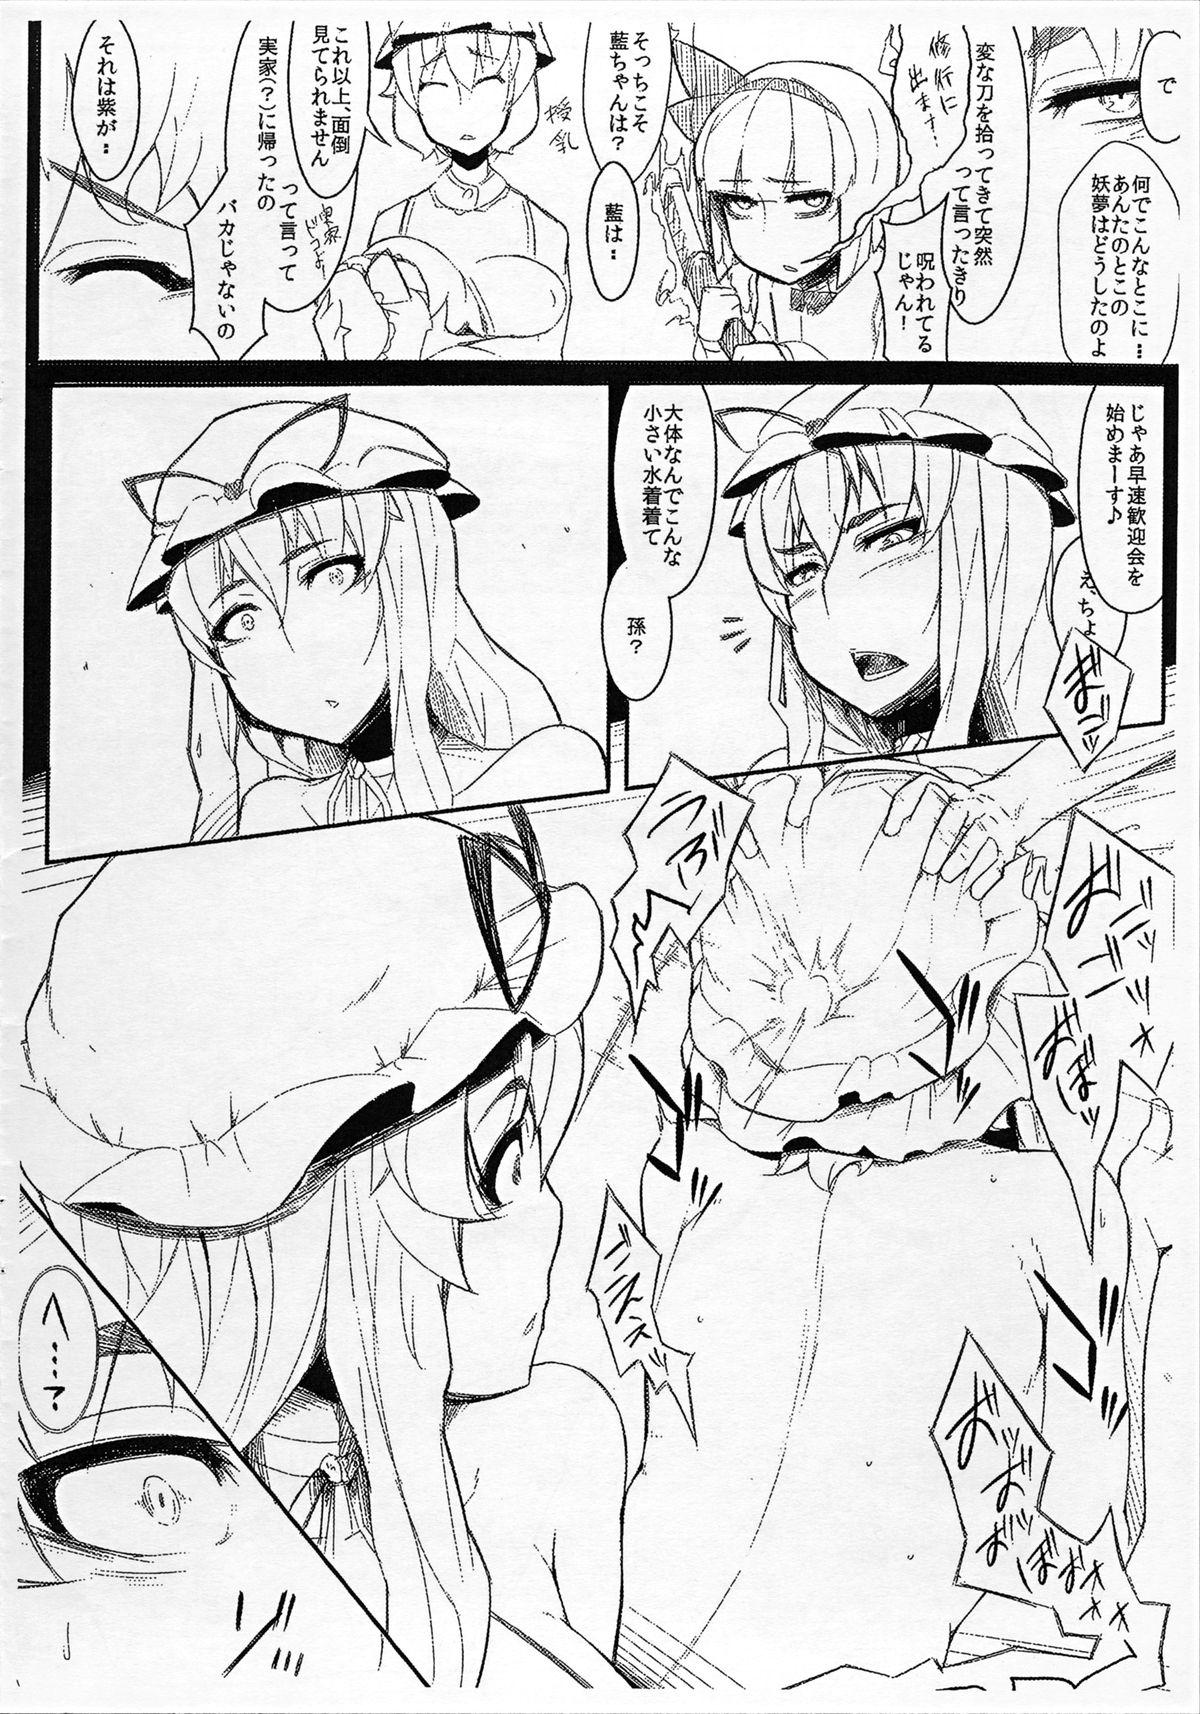  Toshimaen e Youkoso Vol. 0 - Touhou project Gay Reality - Page 3